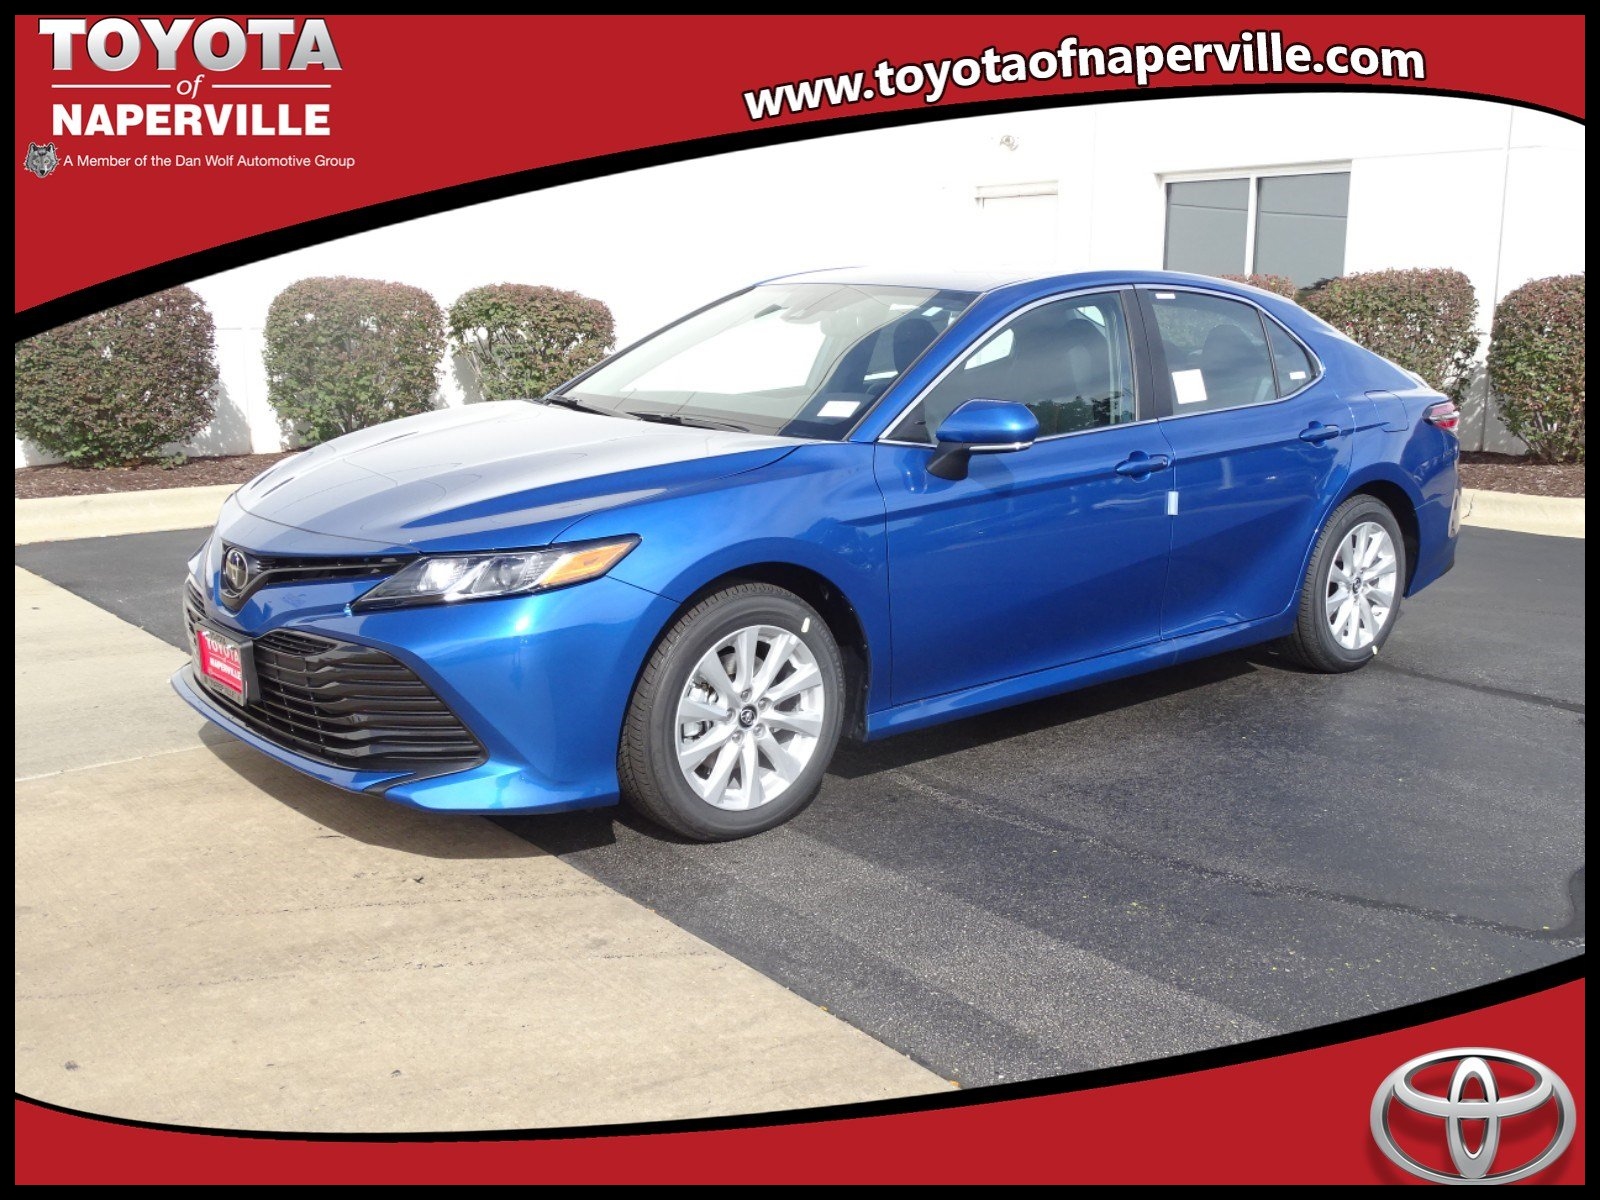 New 2019 Toyota Camry LE